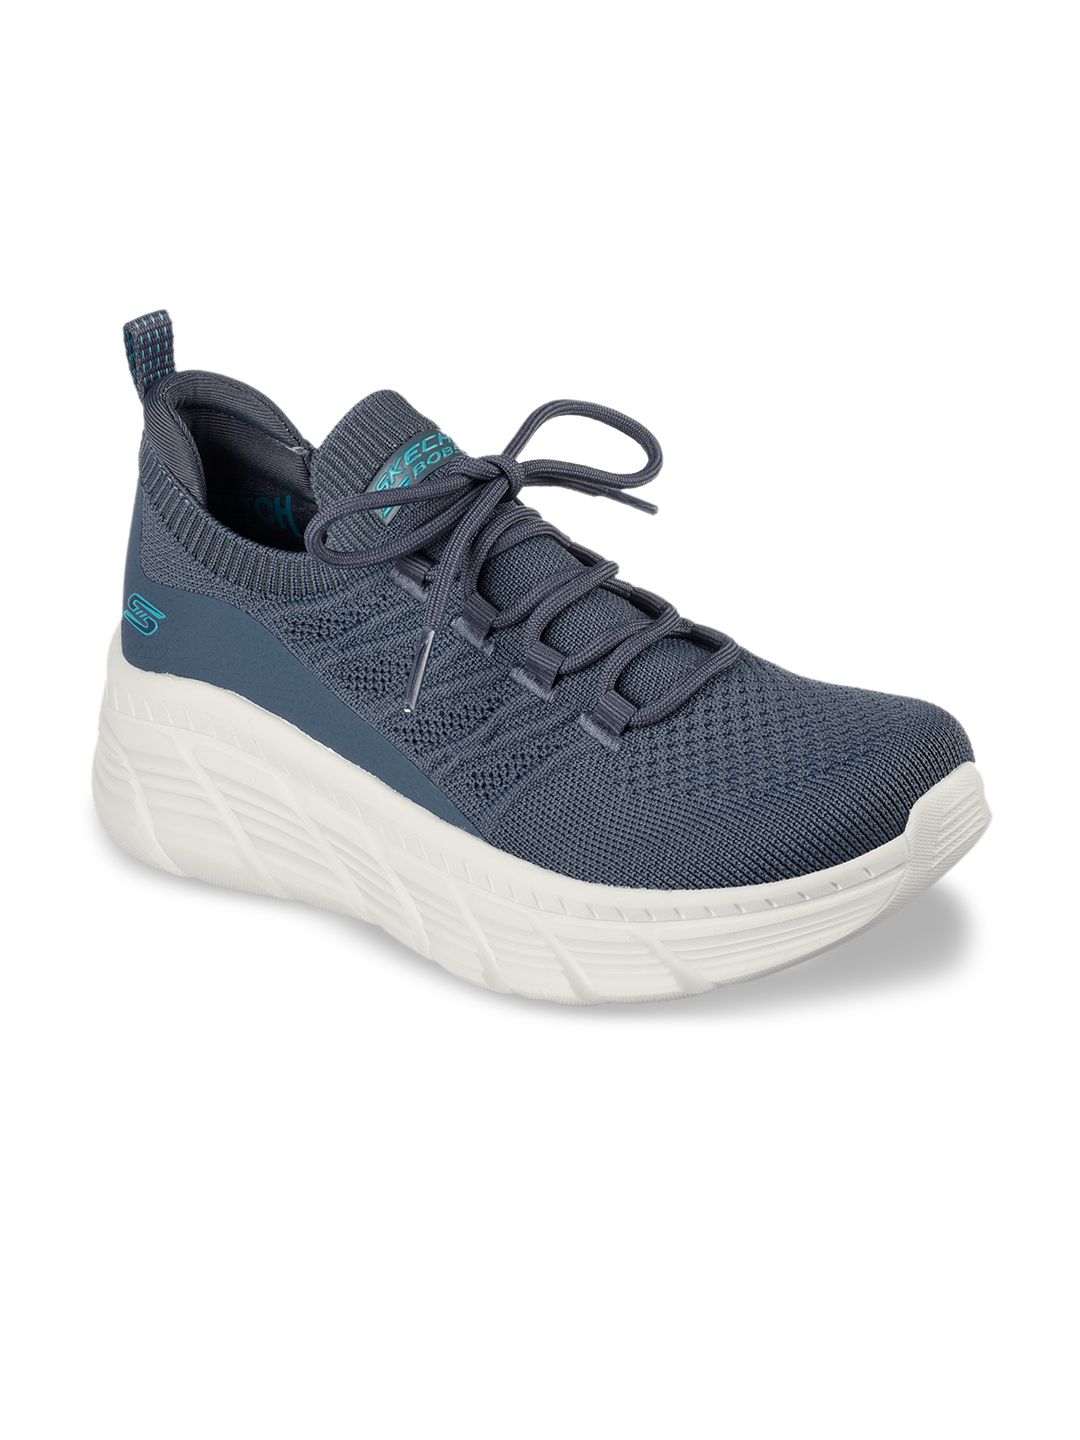 Skechers Women Grey Patterned Casual Sneakers Price in India